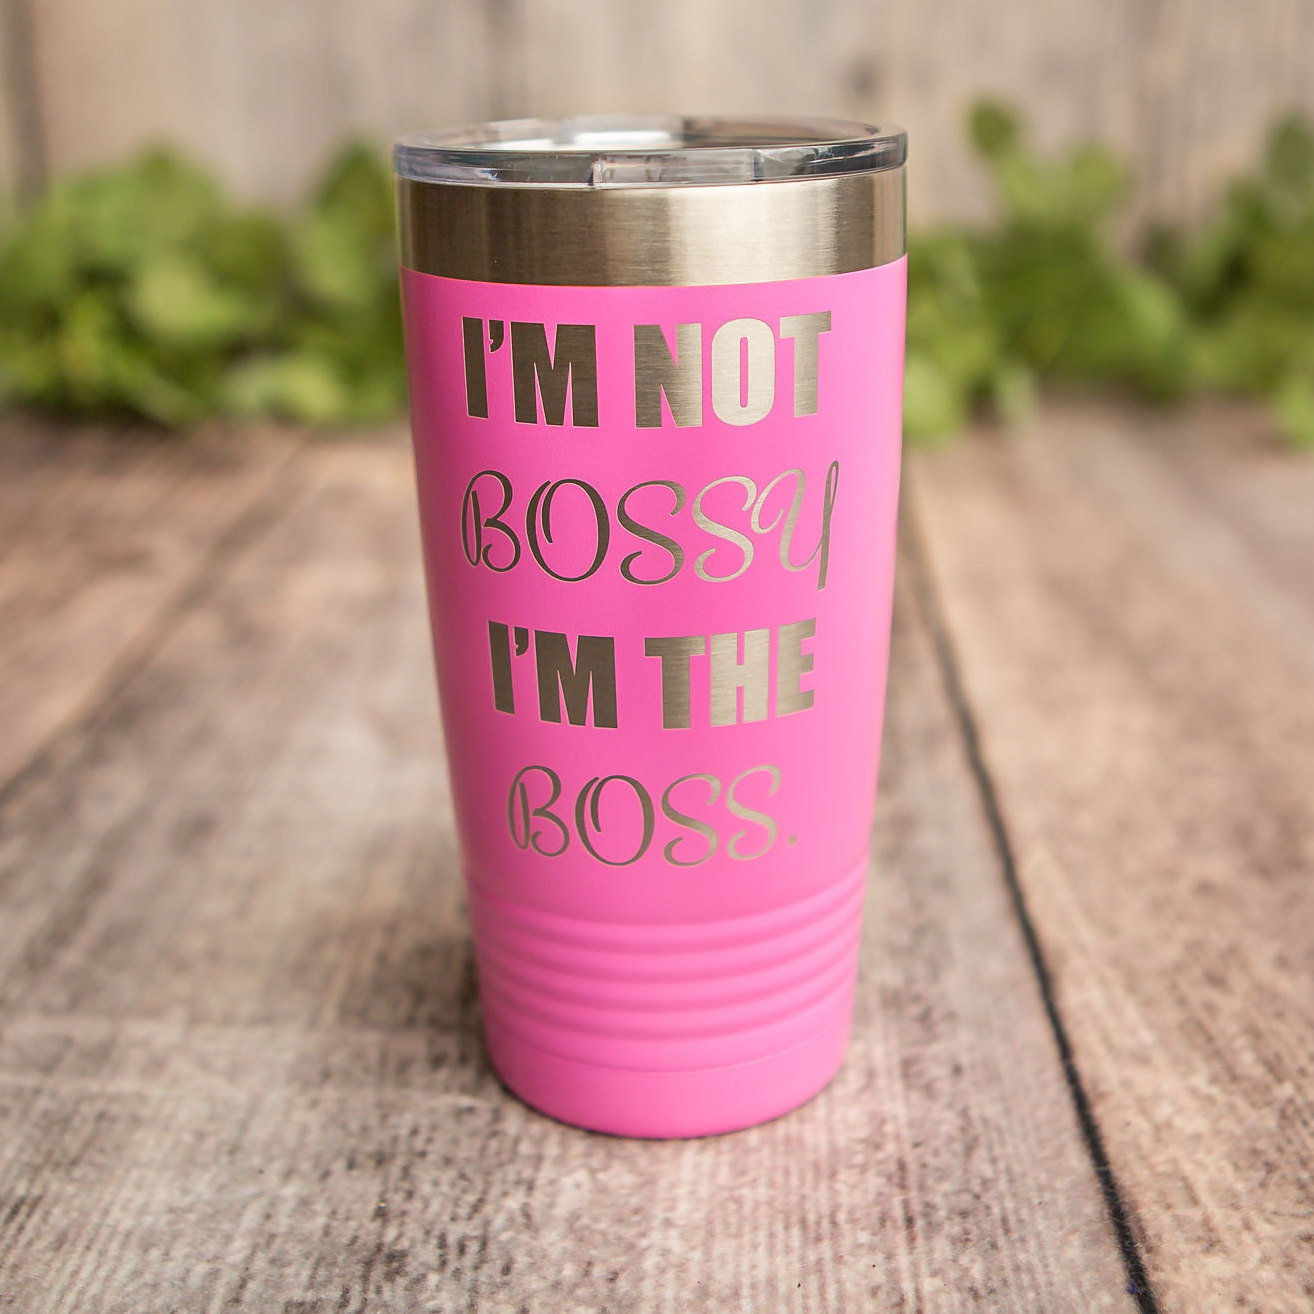 I May Be Small, But I'm The Boss - Engraved Boss Tumbler, Gifts For Her